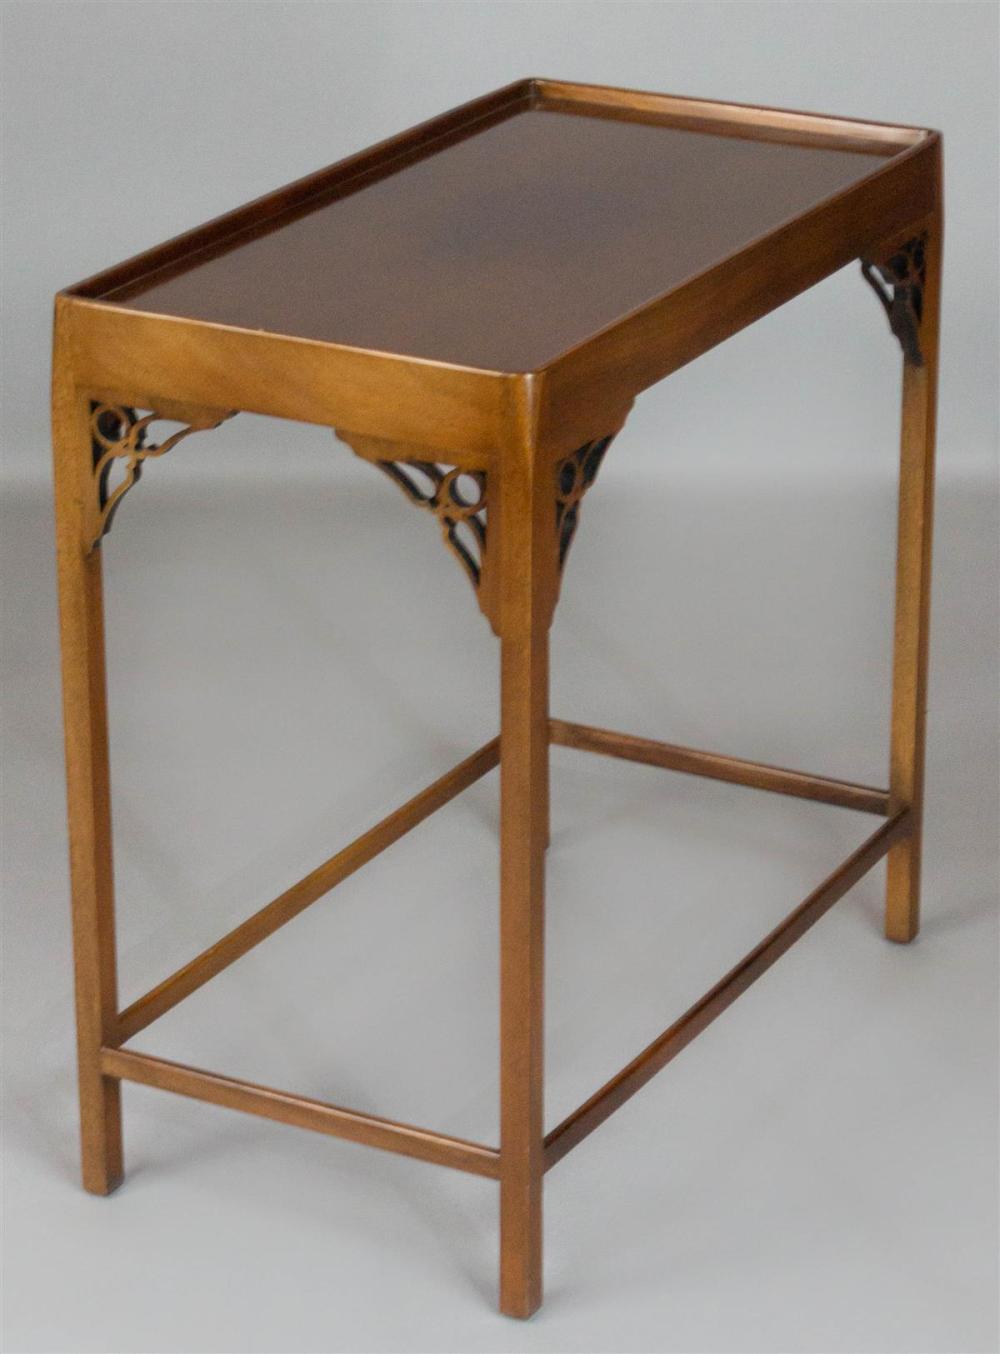 CHIPPENDALE STYLE MAHOGANY SIDE 311cca